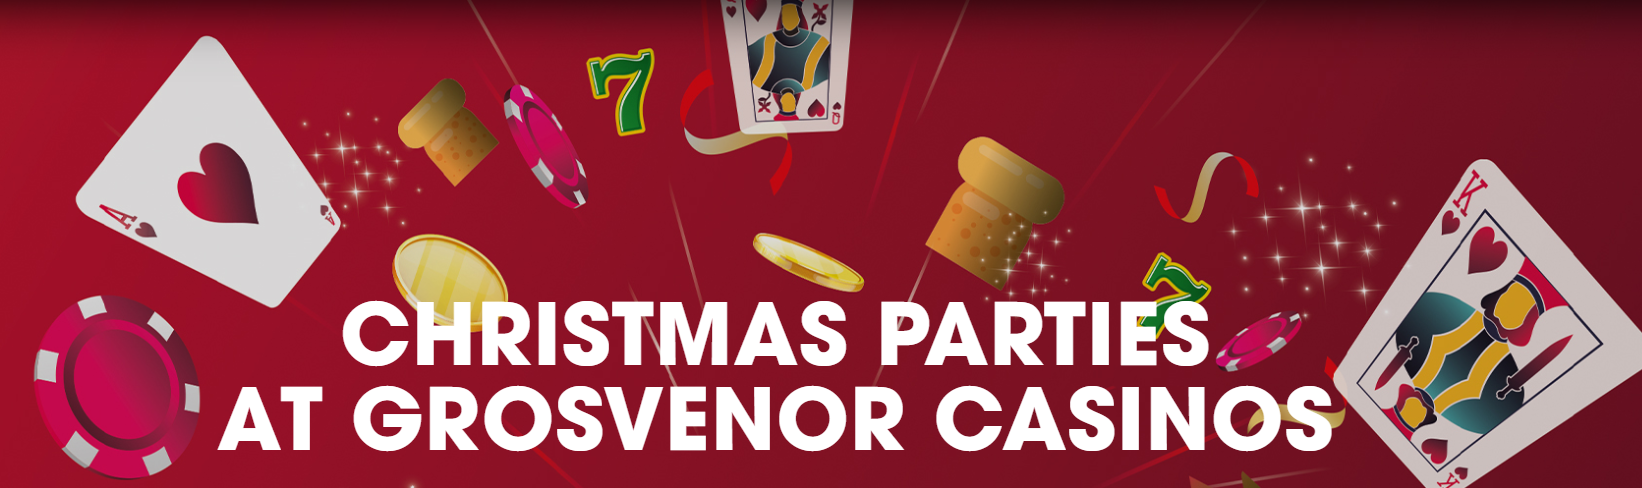 casino holiday party powerpoint template